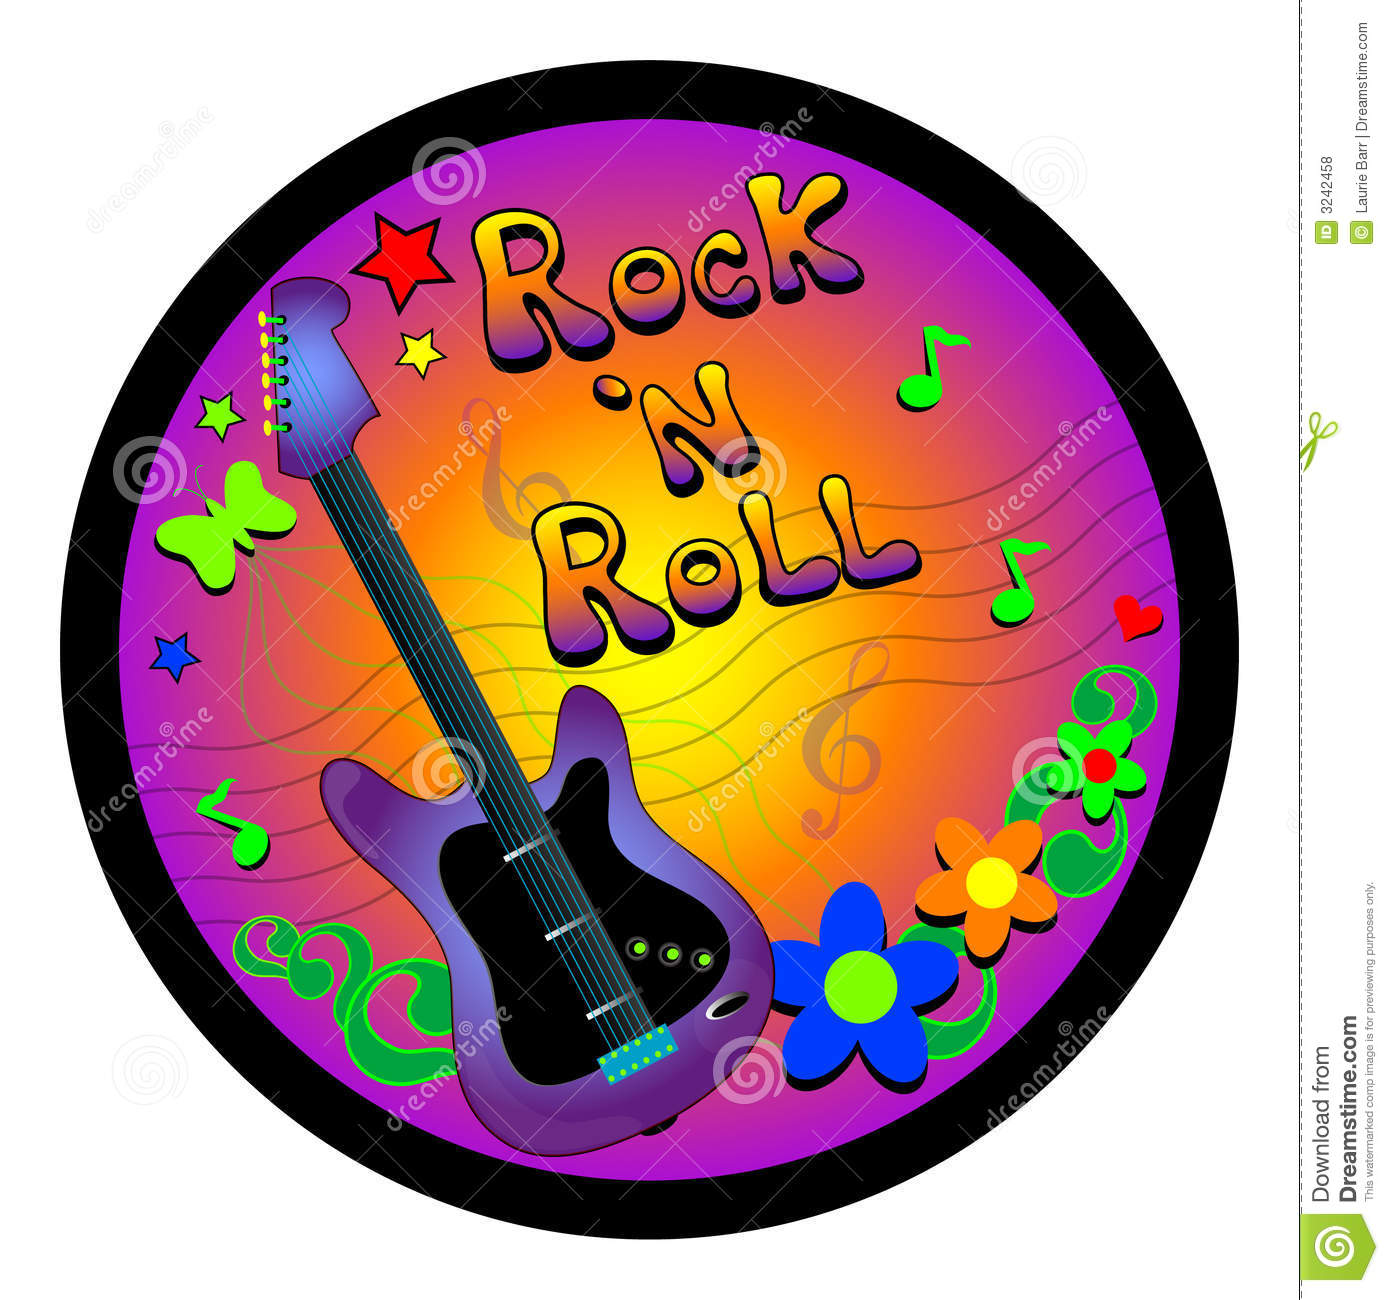 Free clipart rock and roll 5 » Clipart Station.